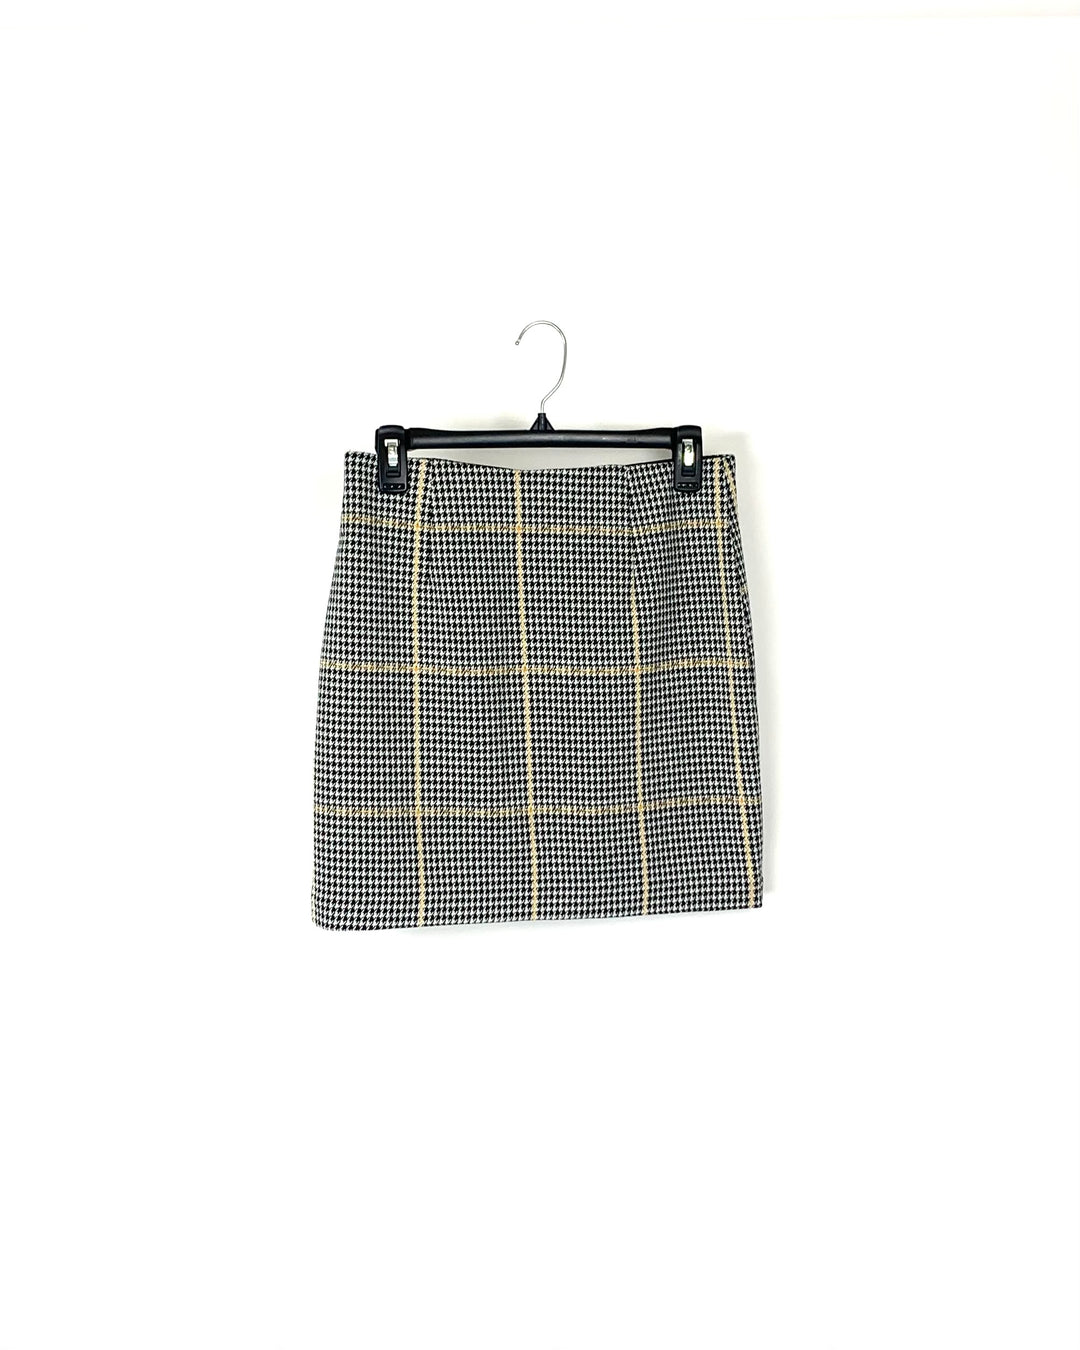 Black, White, And Yellow Houndstooth Mini Skirt - Small